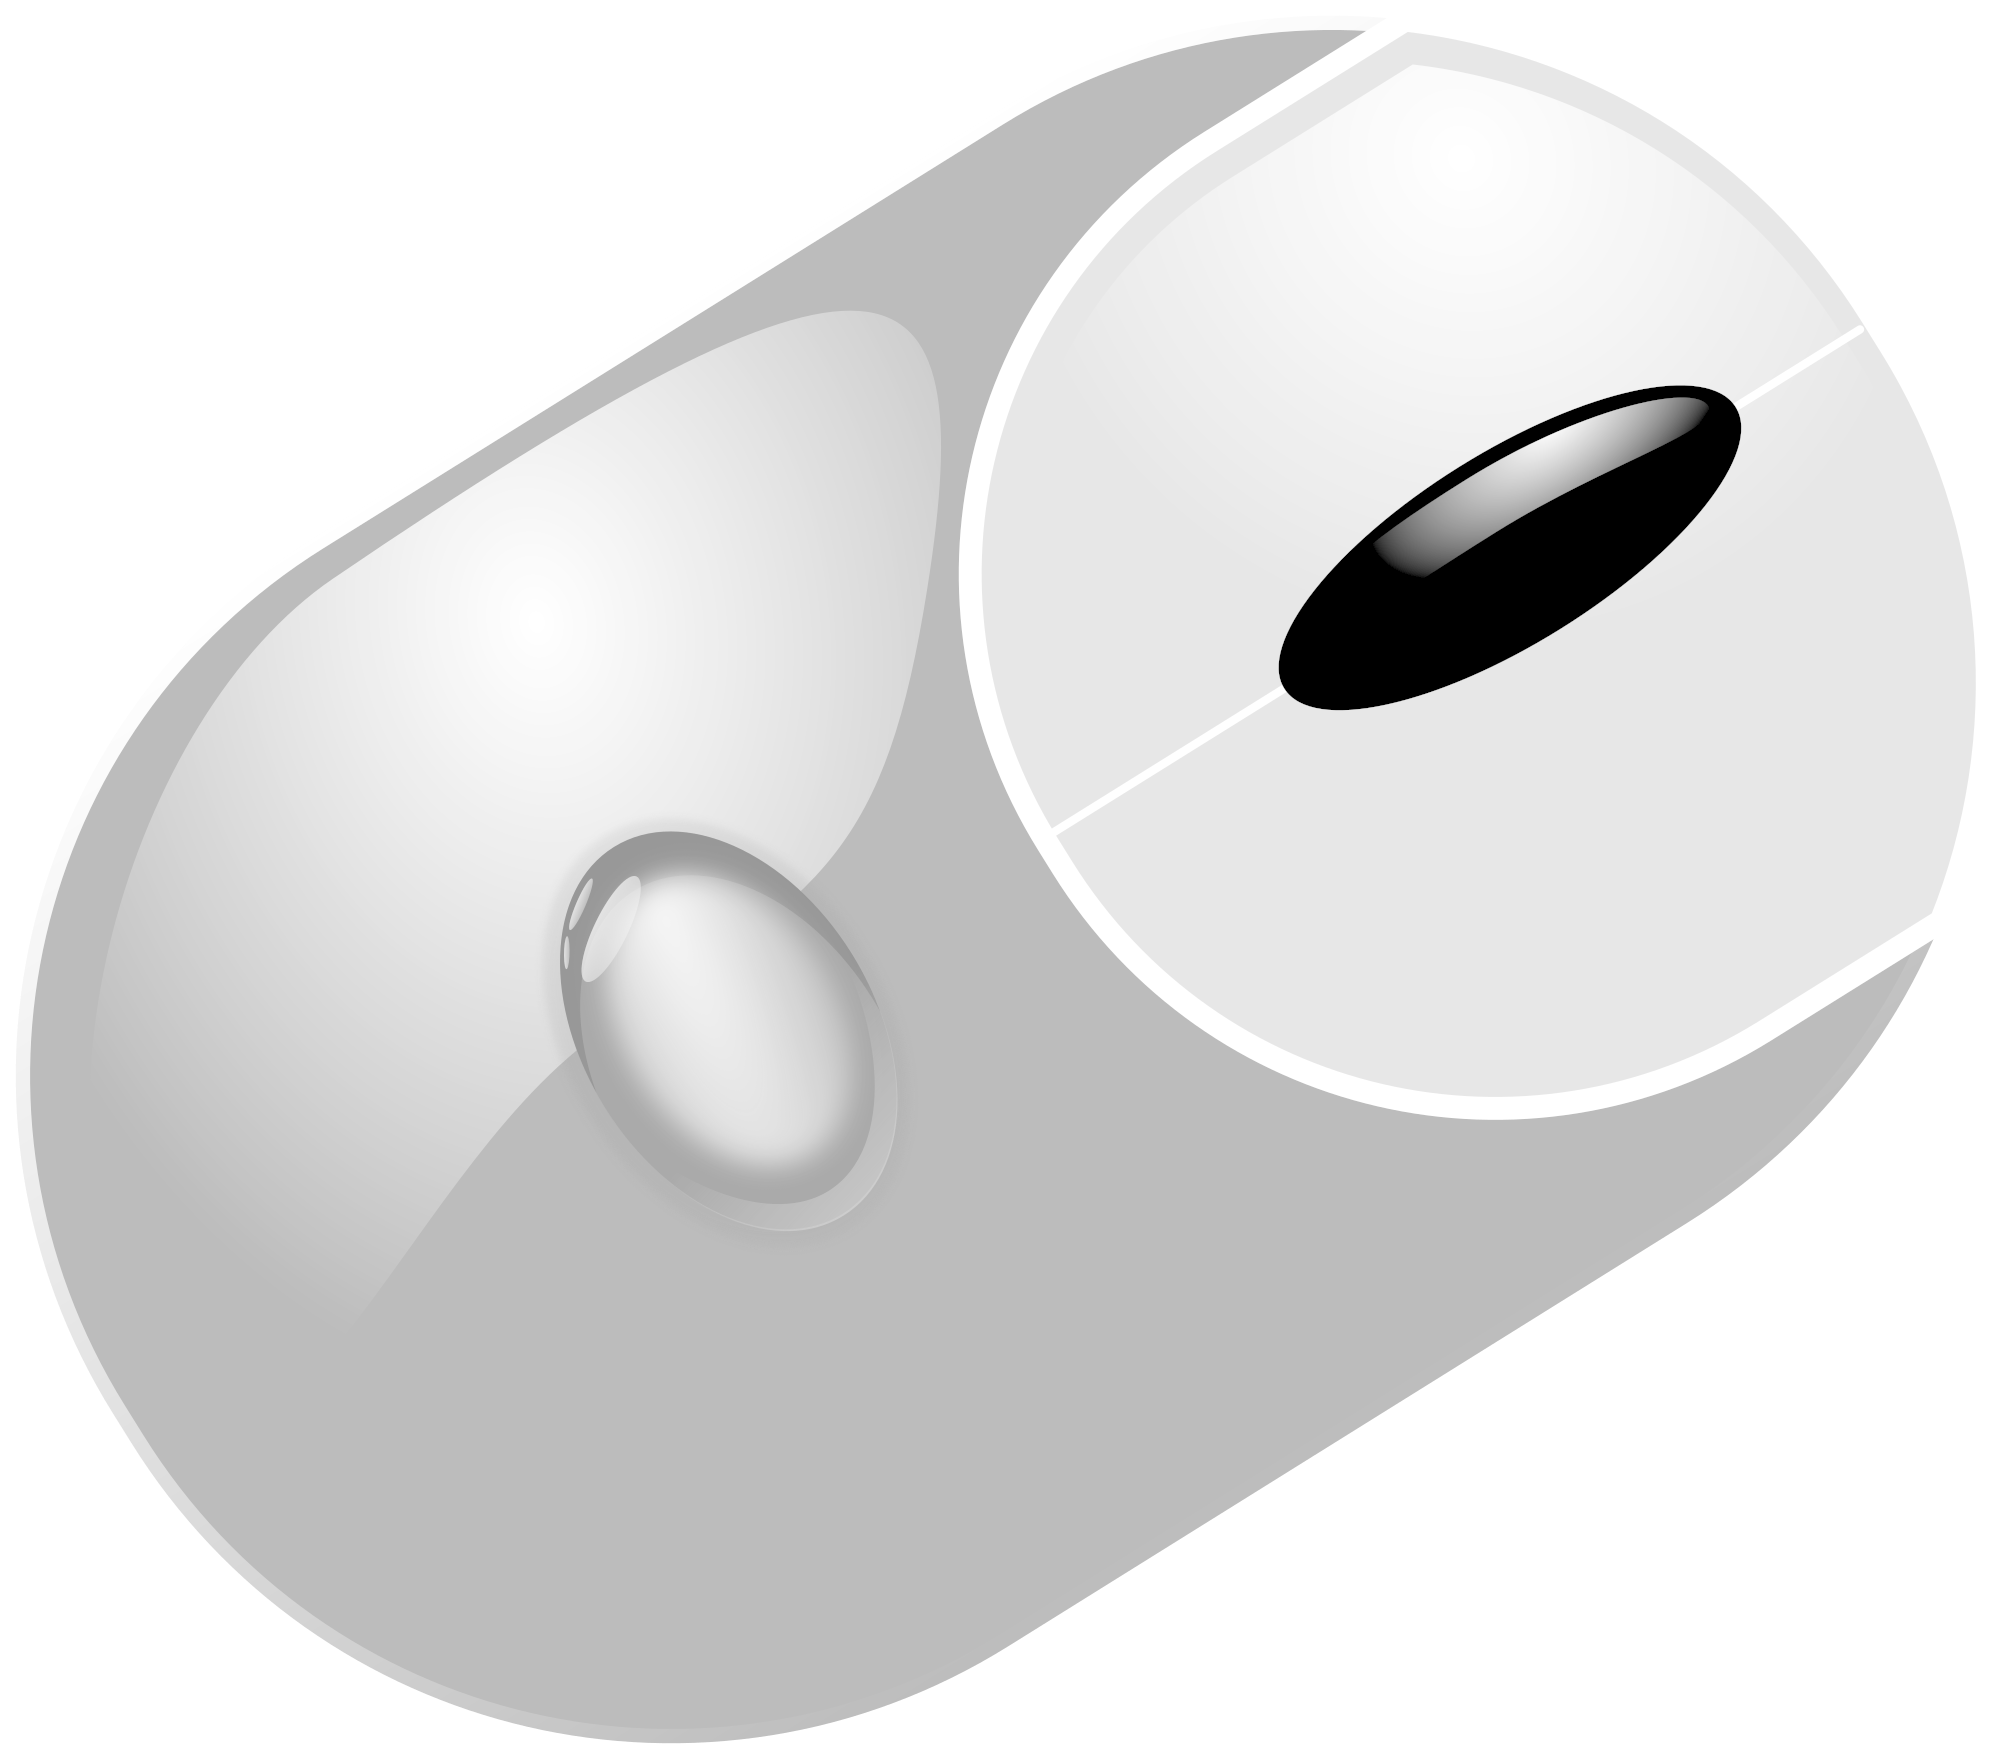 Modern White Computer Mouse